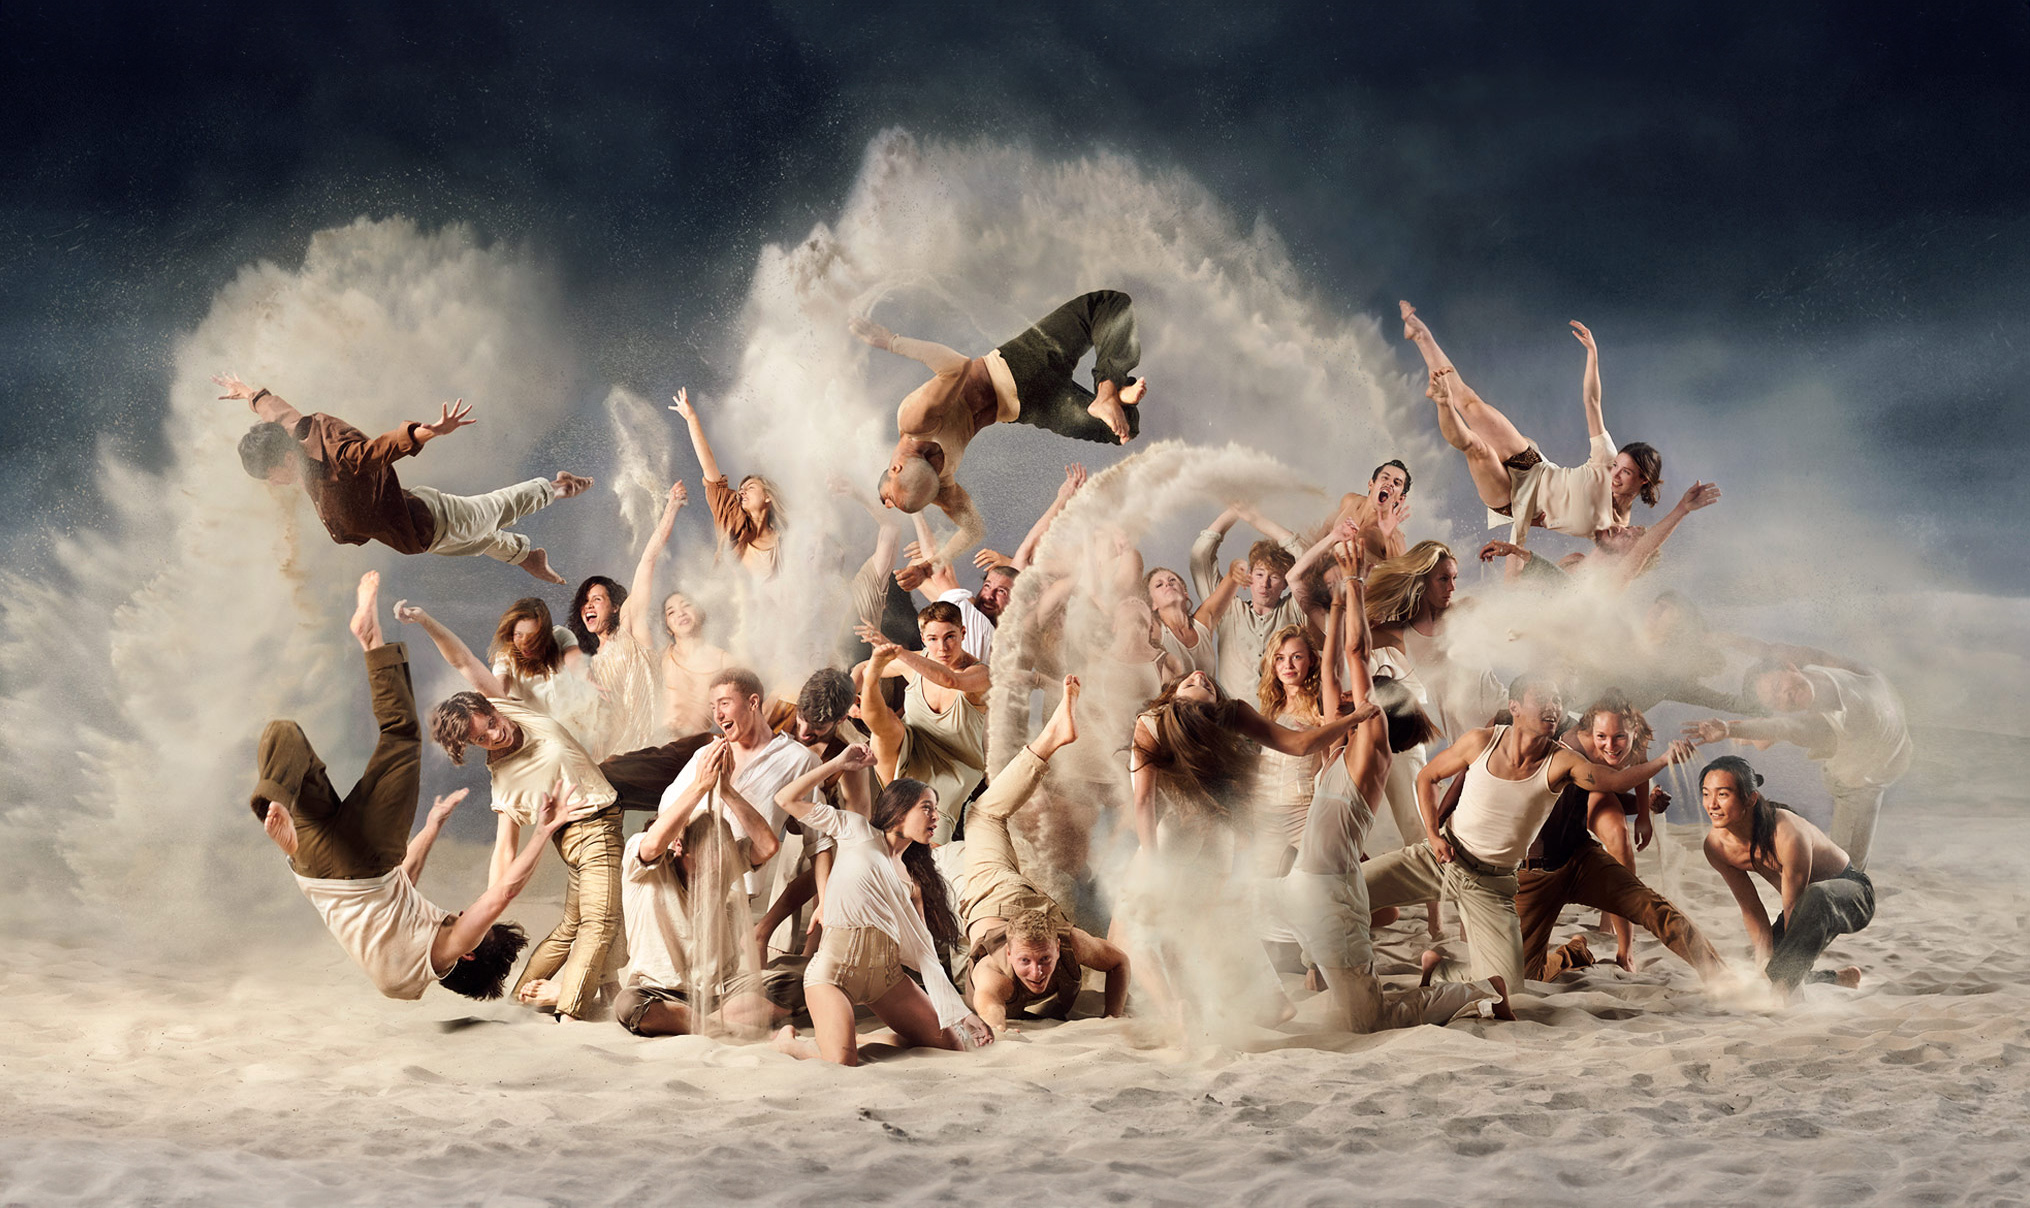 A group of people in various poses, surrounded by large clouds of sand against a dark background. The group is dressed in neutral colors, mostly beige and brown. Some individuals are jumping up, while others are bending or extending their arms. The thick cloud of sand creates a dramatic effect, and the background is dark, strongly contrasting with the bright clouds and the clothing of the individuals. There is no distinct environment; the focus is entirely on the people and the swirling sand.